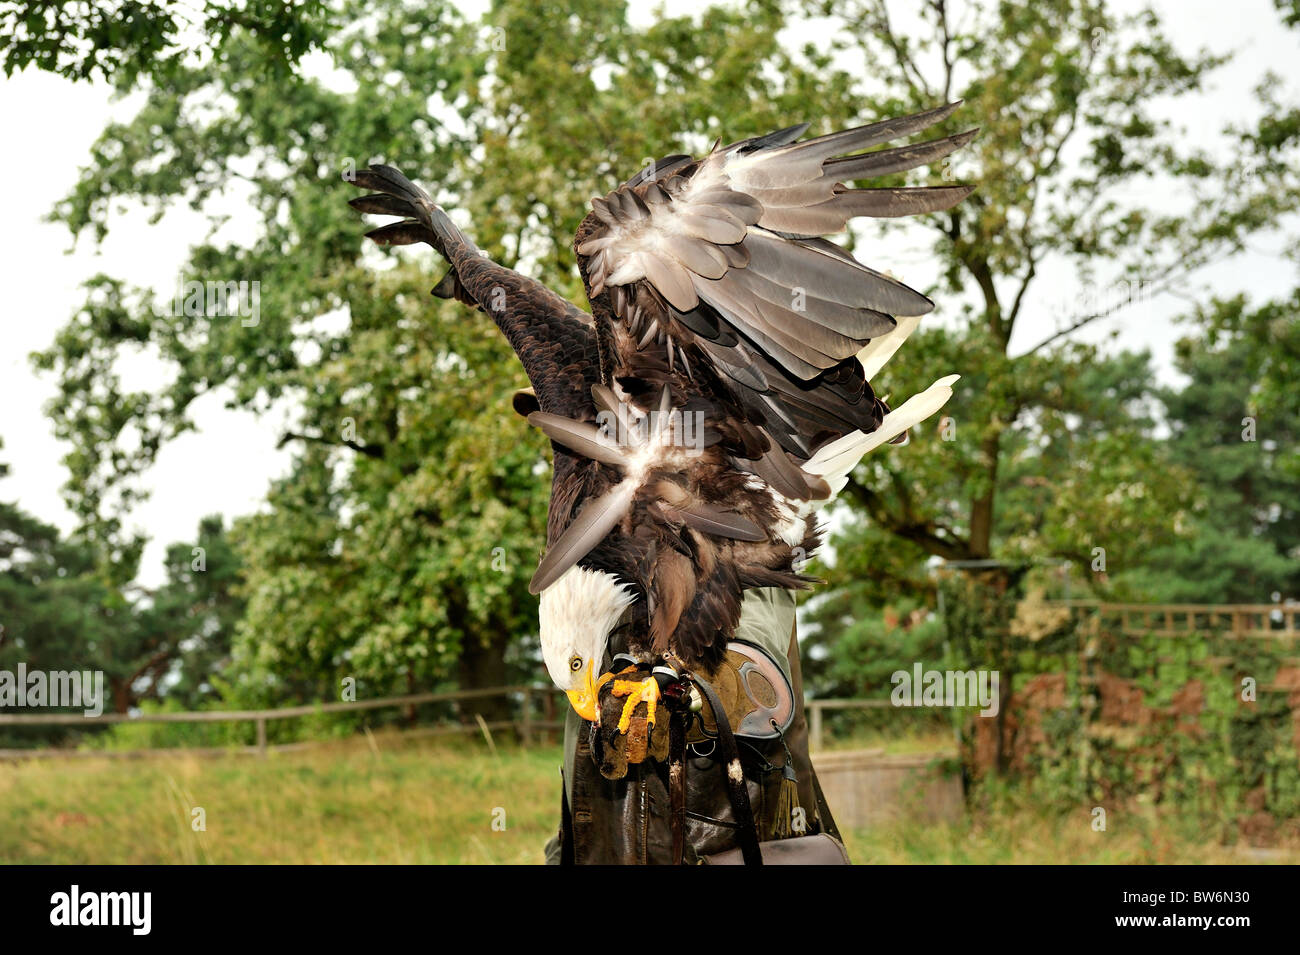 Men carrying a bald eagle on his arm.Bald Eagle,Falconry Harz,Burg Regenstein,Harz Mountains,Saxony Anhalt,Germany. Stock Photo